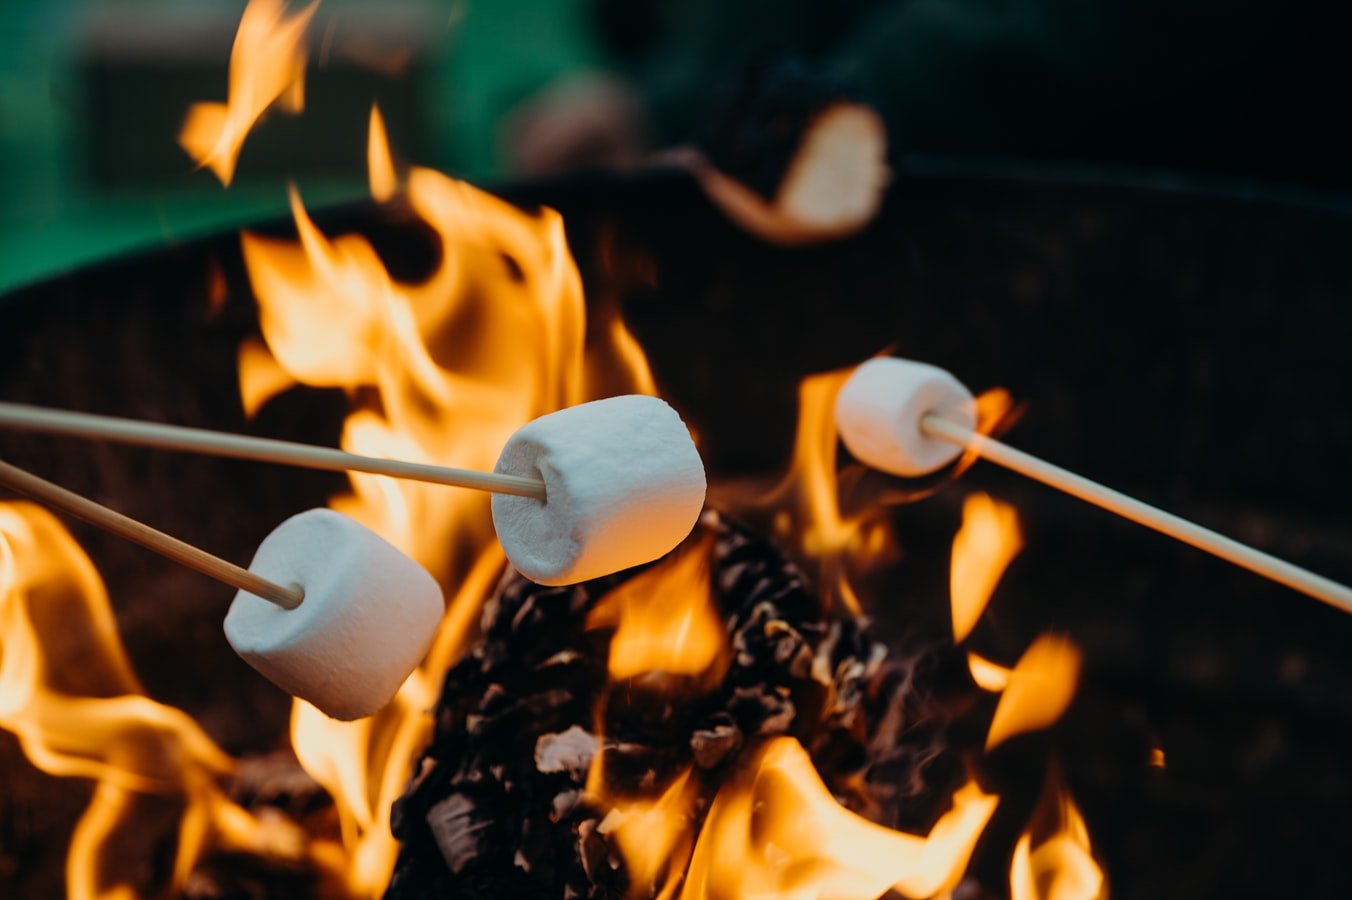 The wife recalled the time when they had bonfire and roasted marshmallows. | Photo: Unsplash/Leon Contreras